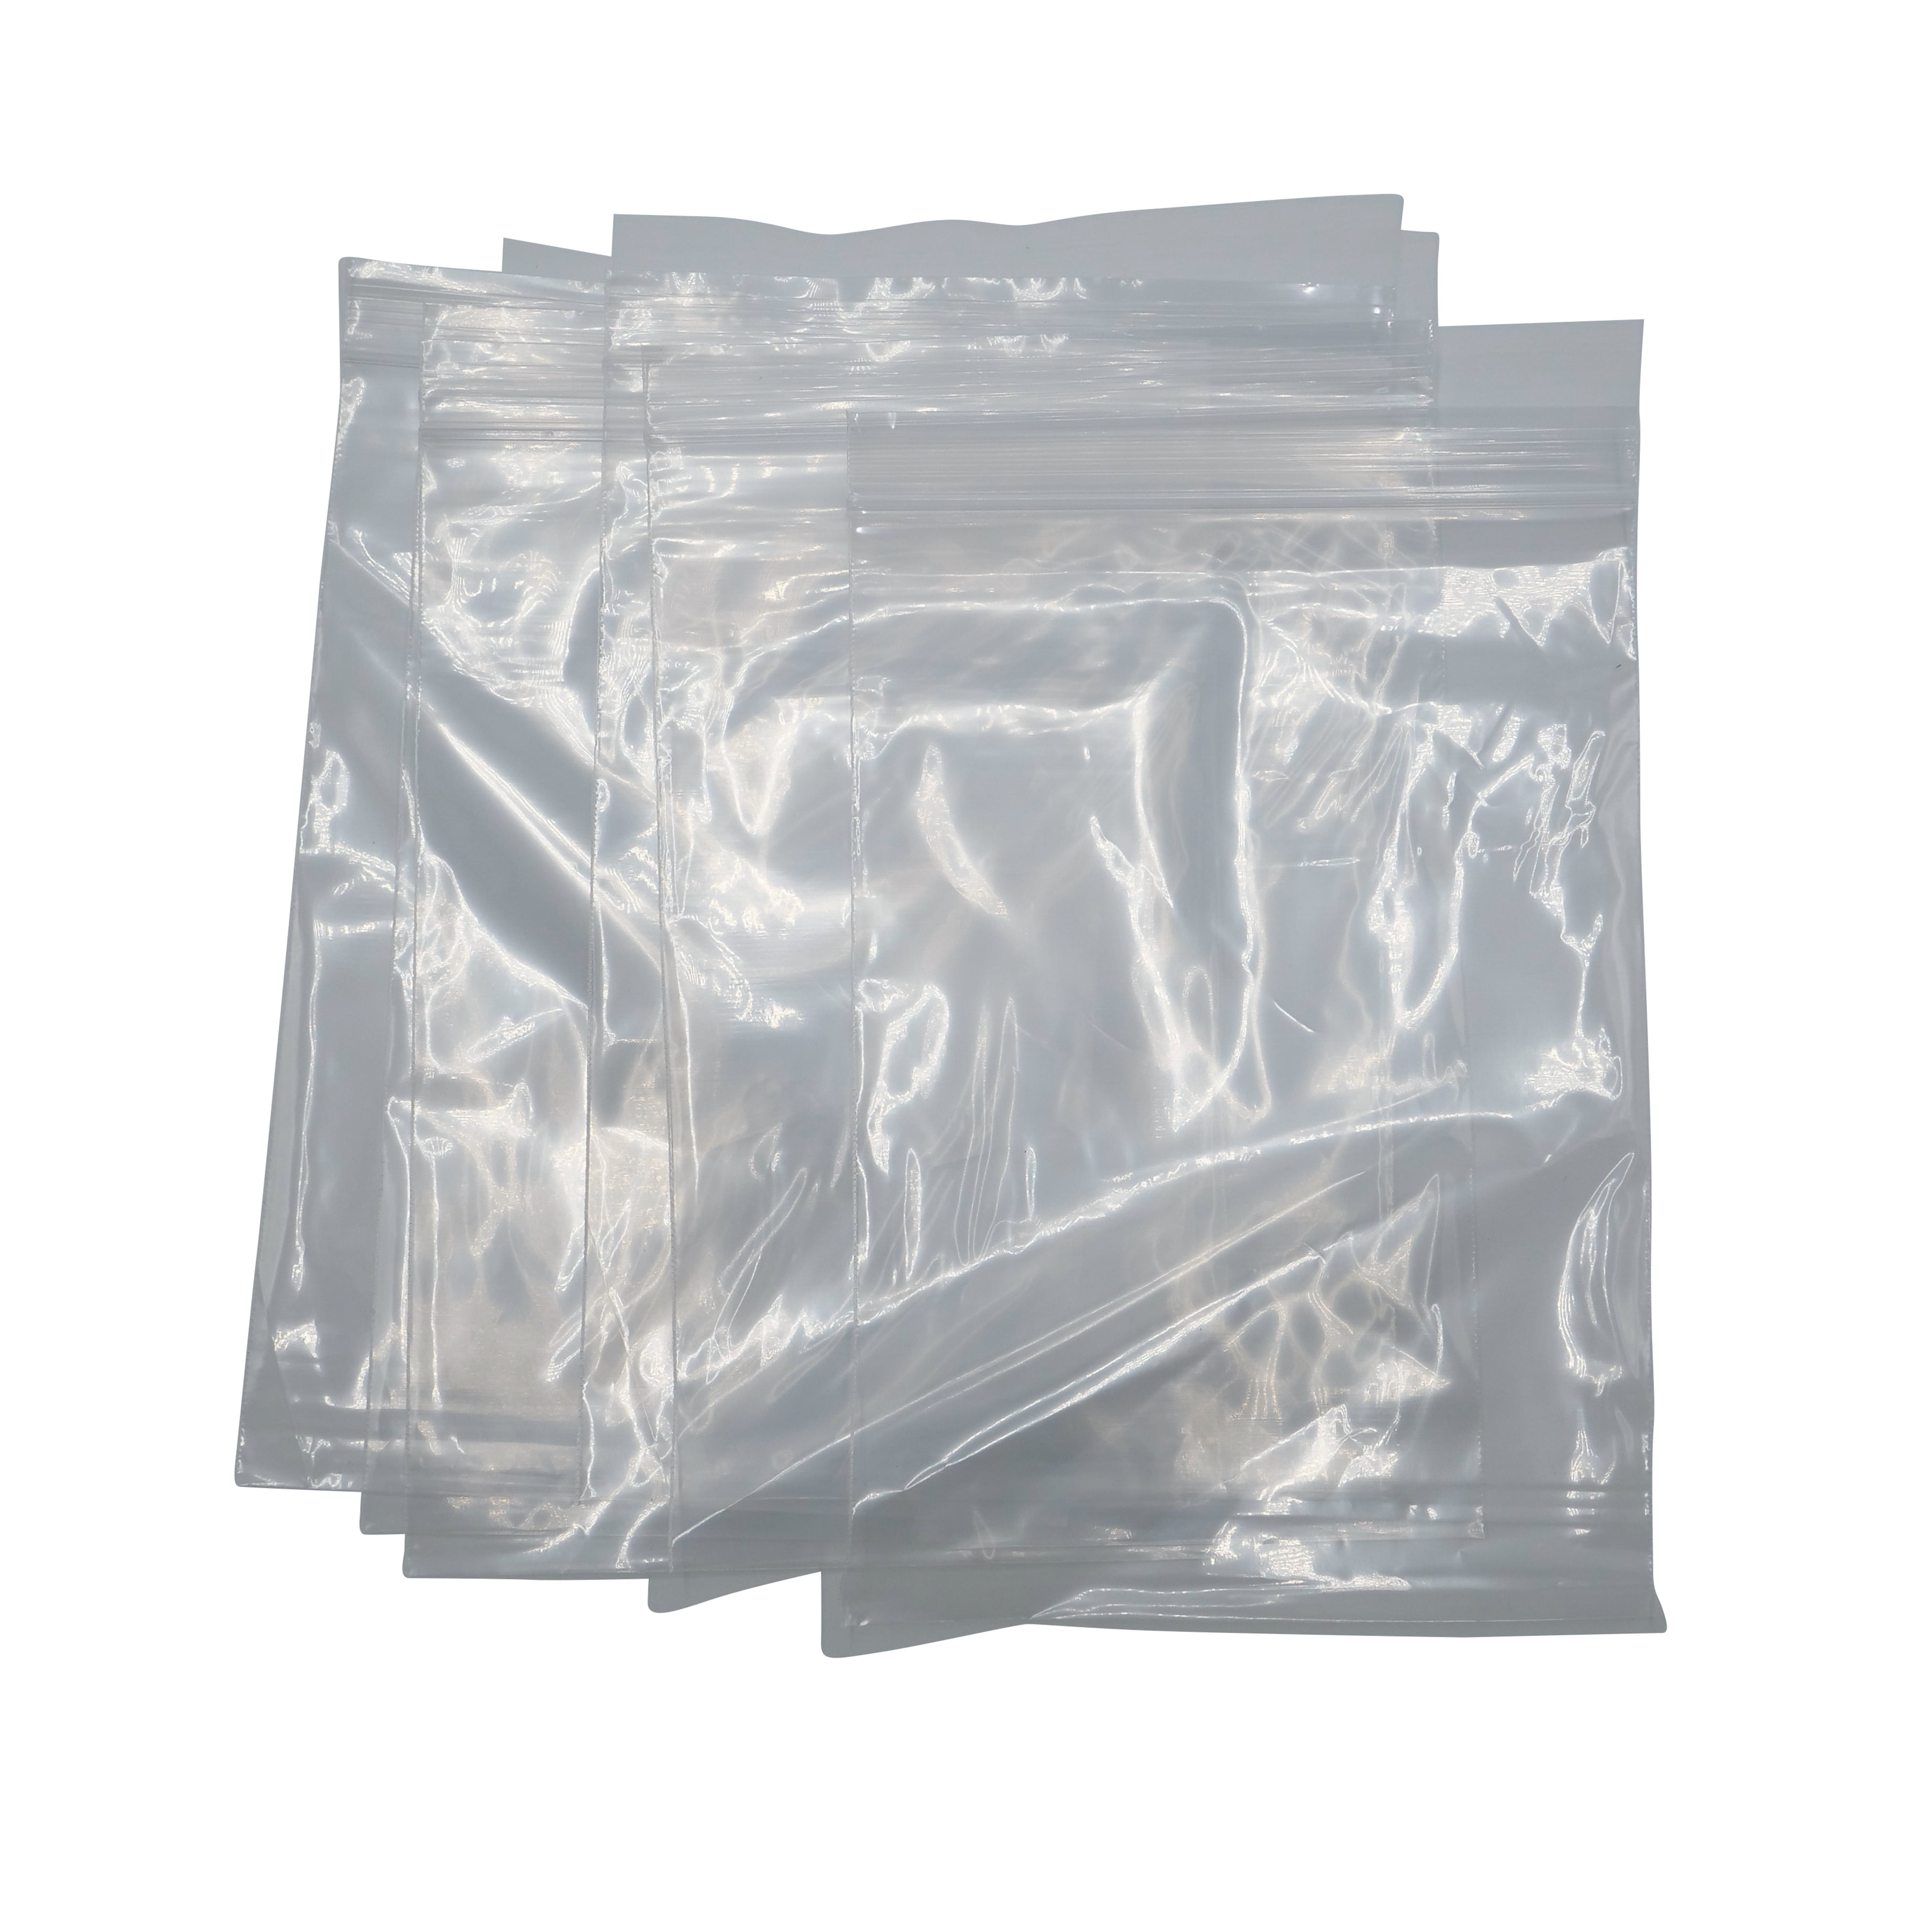 Crystal Clear Polyethylene Zipper Bags with Round Hang Hole, 5” x 7”, 100  Pack